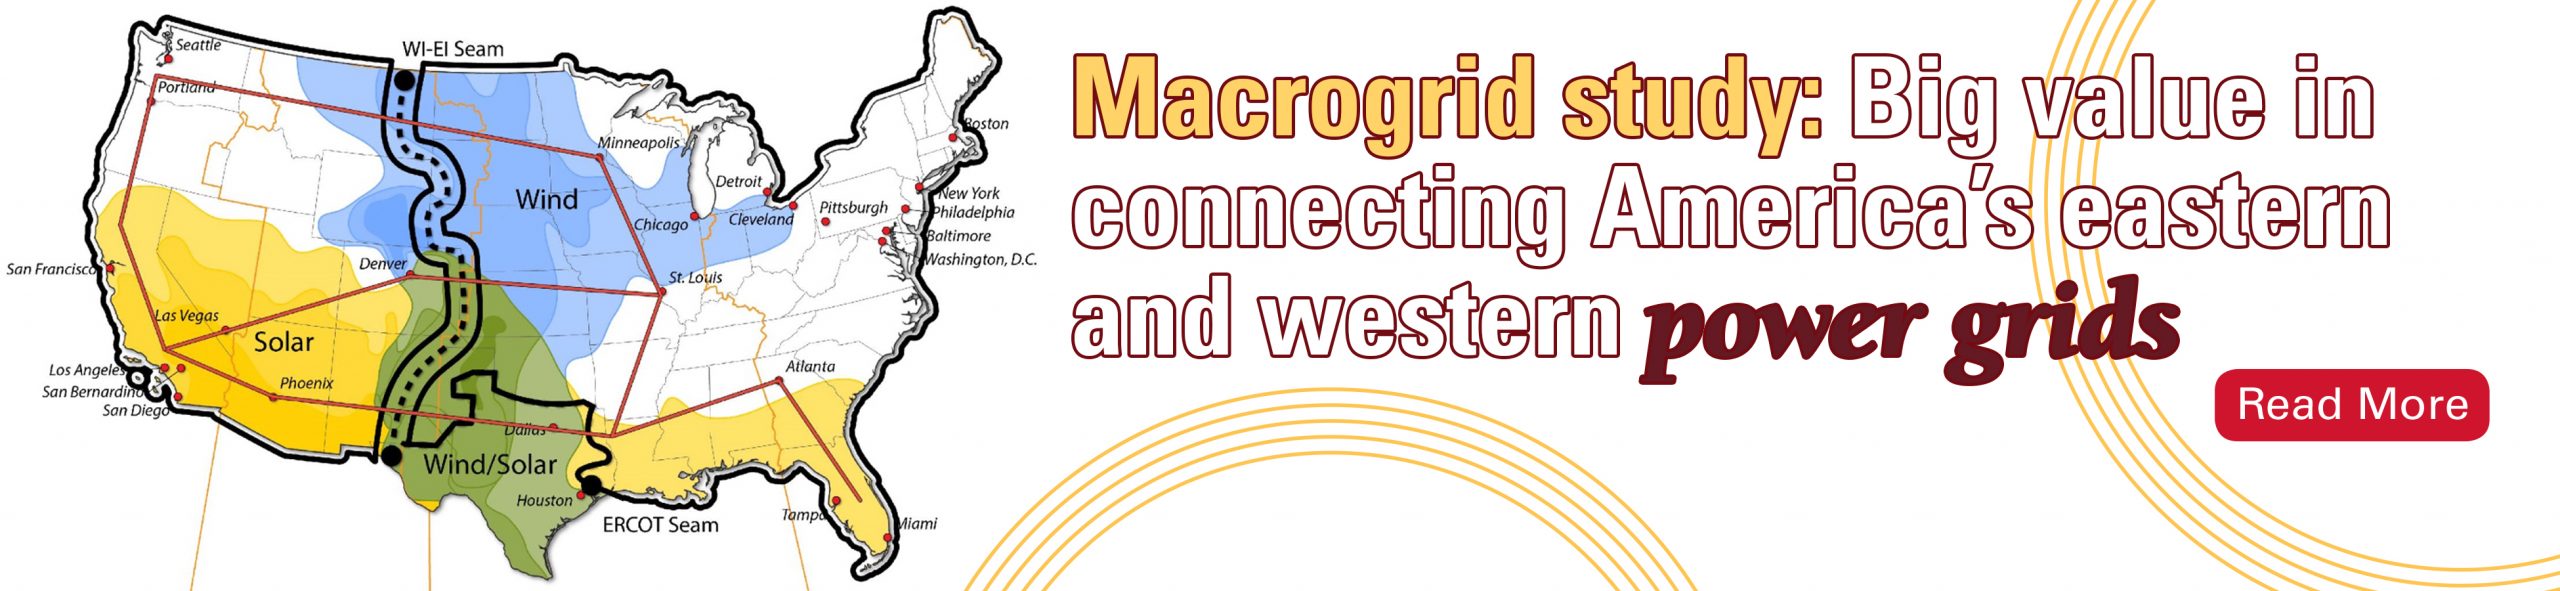 Macrogrid study: Big value in connecting America's eastern and western power grids. Read more